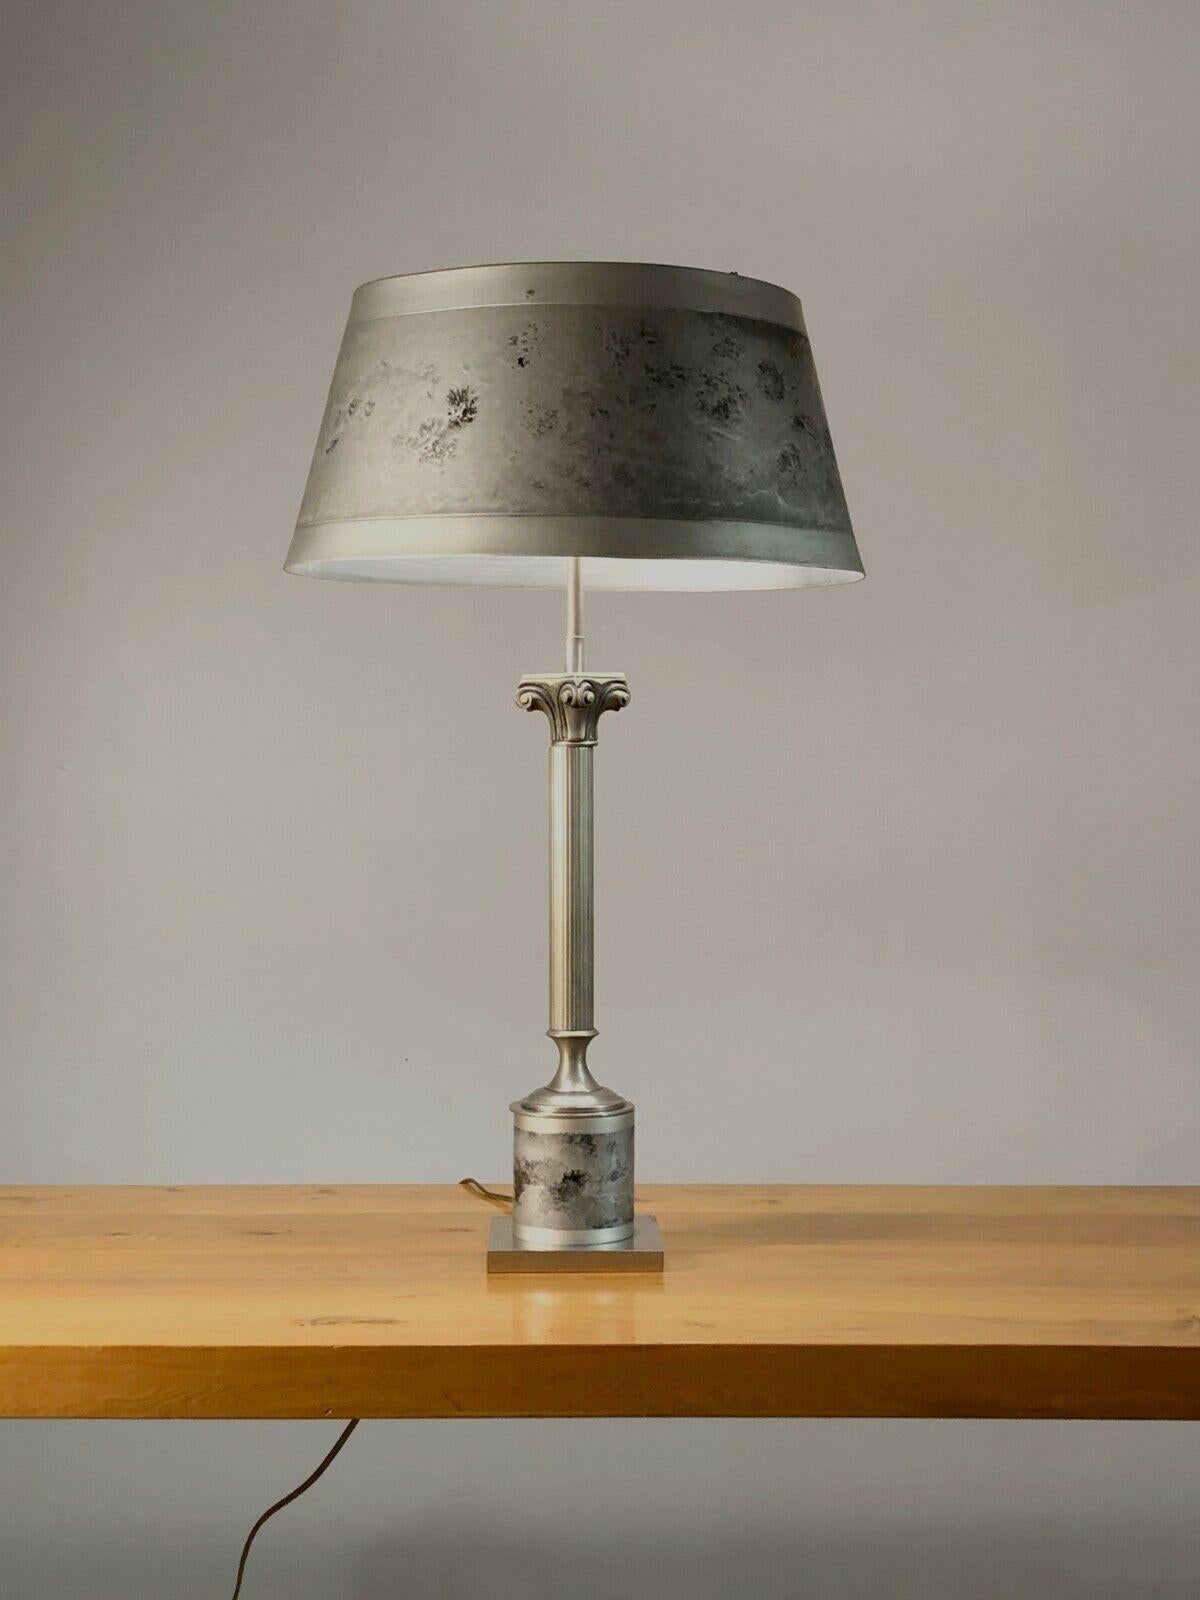 A large and very elegant table lamp, Post-Modernist, Neo-Classical, Shabby-Chic, with an ionic column body, original cylindrical lampshade, with elegant psychedelic metallic decorations, all with superb matt nickel-plated finishes, attributed to